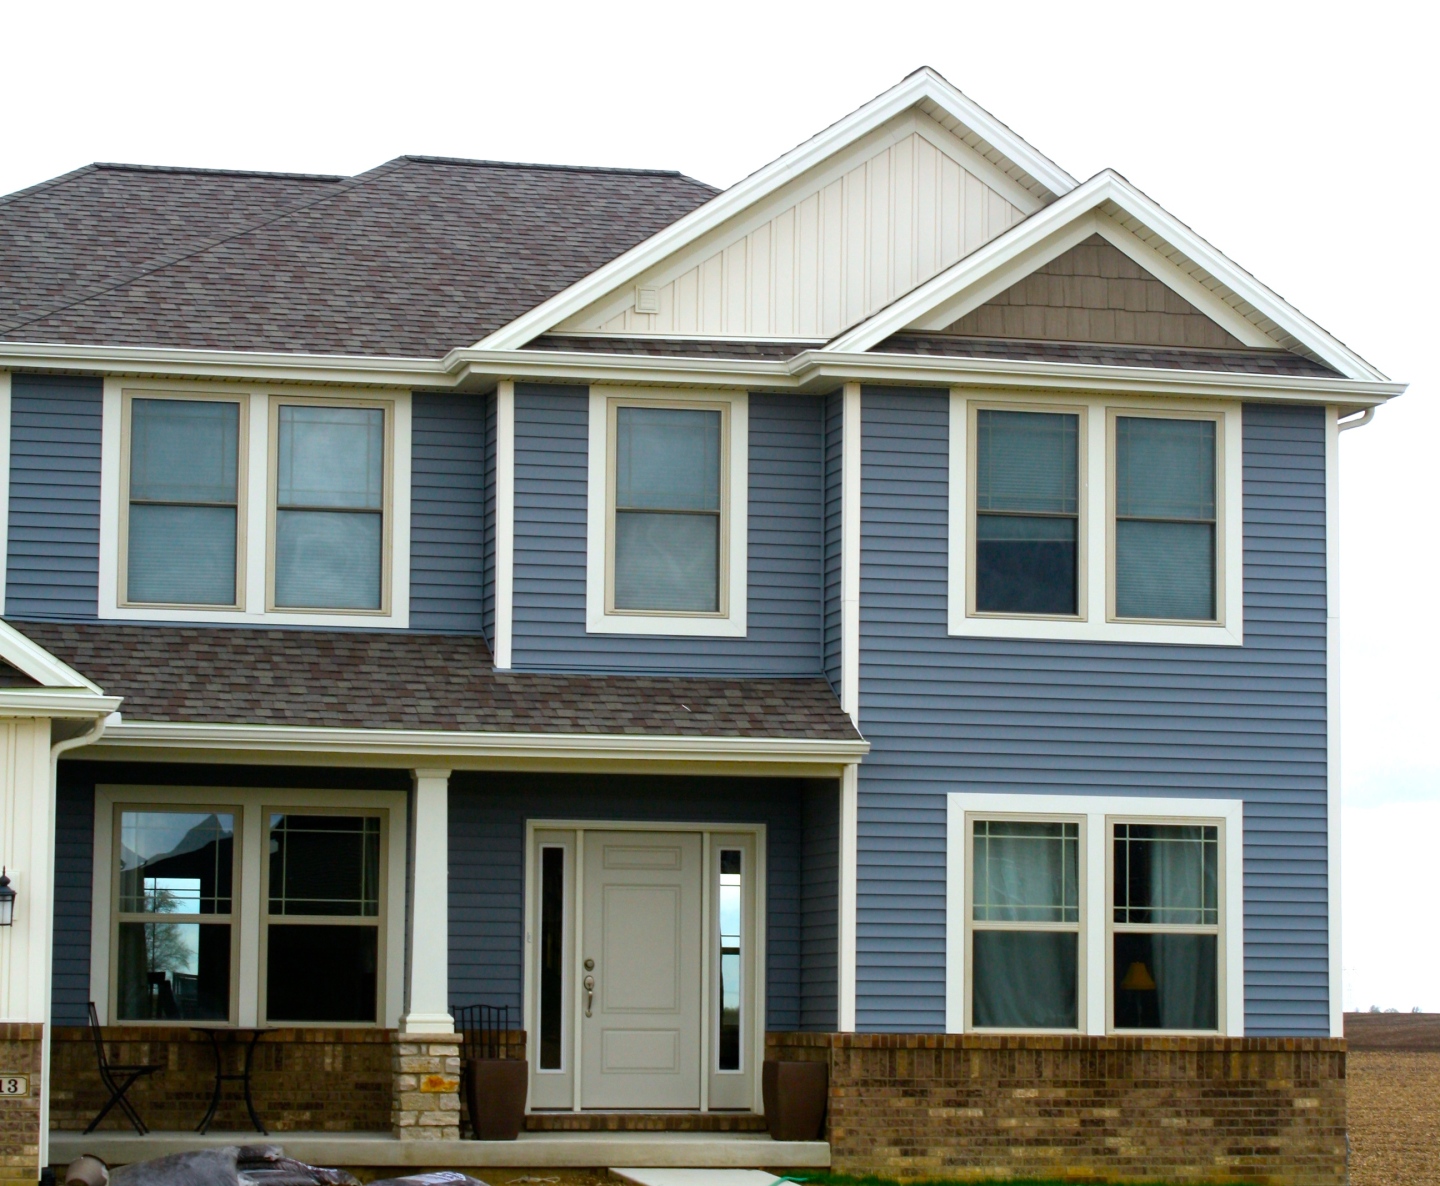 two story blue house with cream and tan accents. Faux cedar skaes